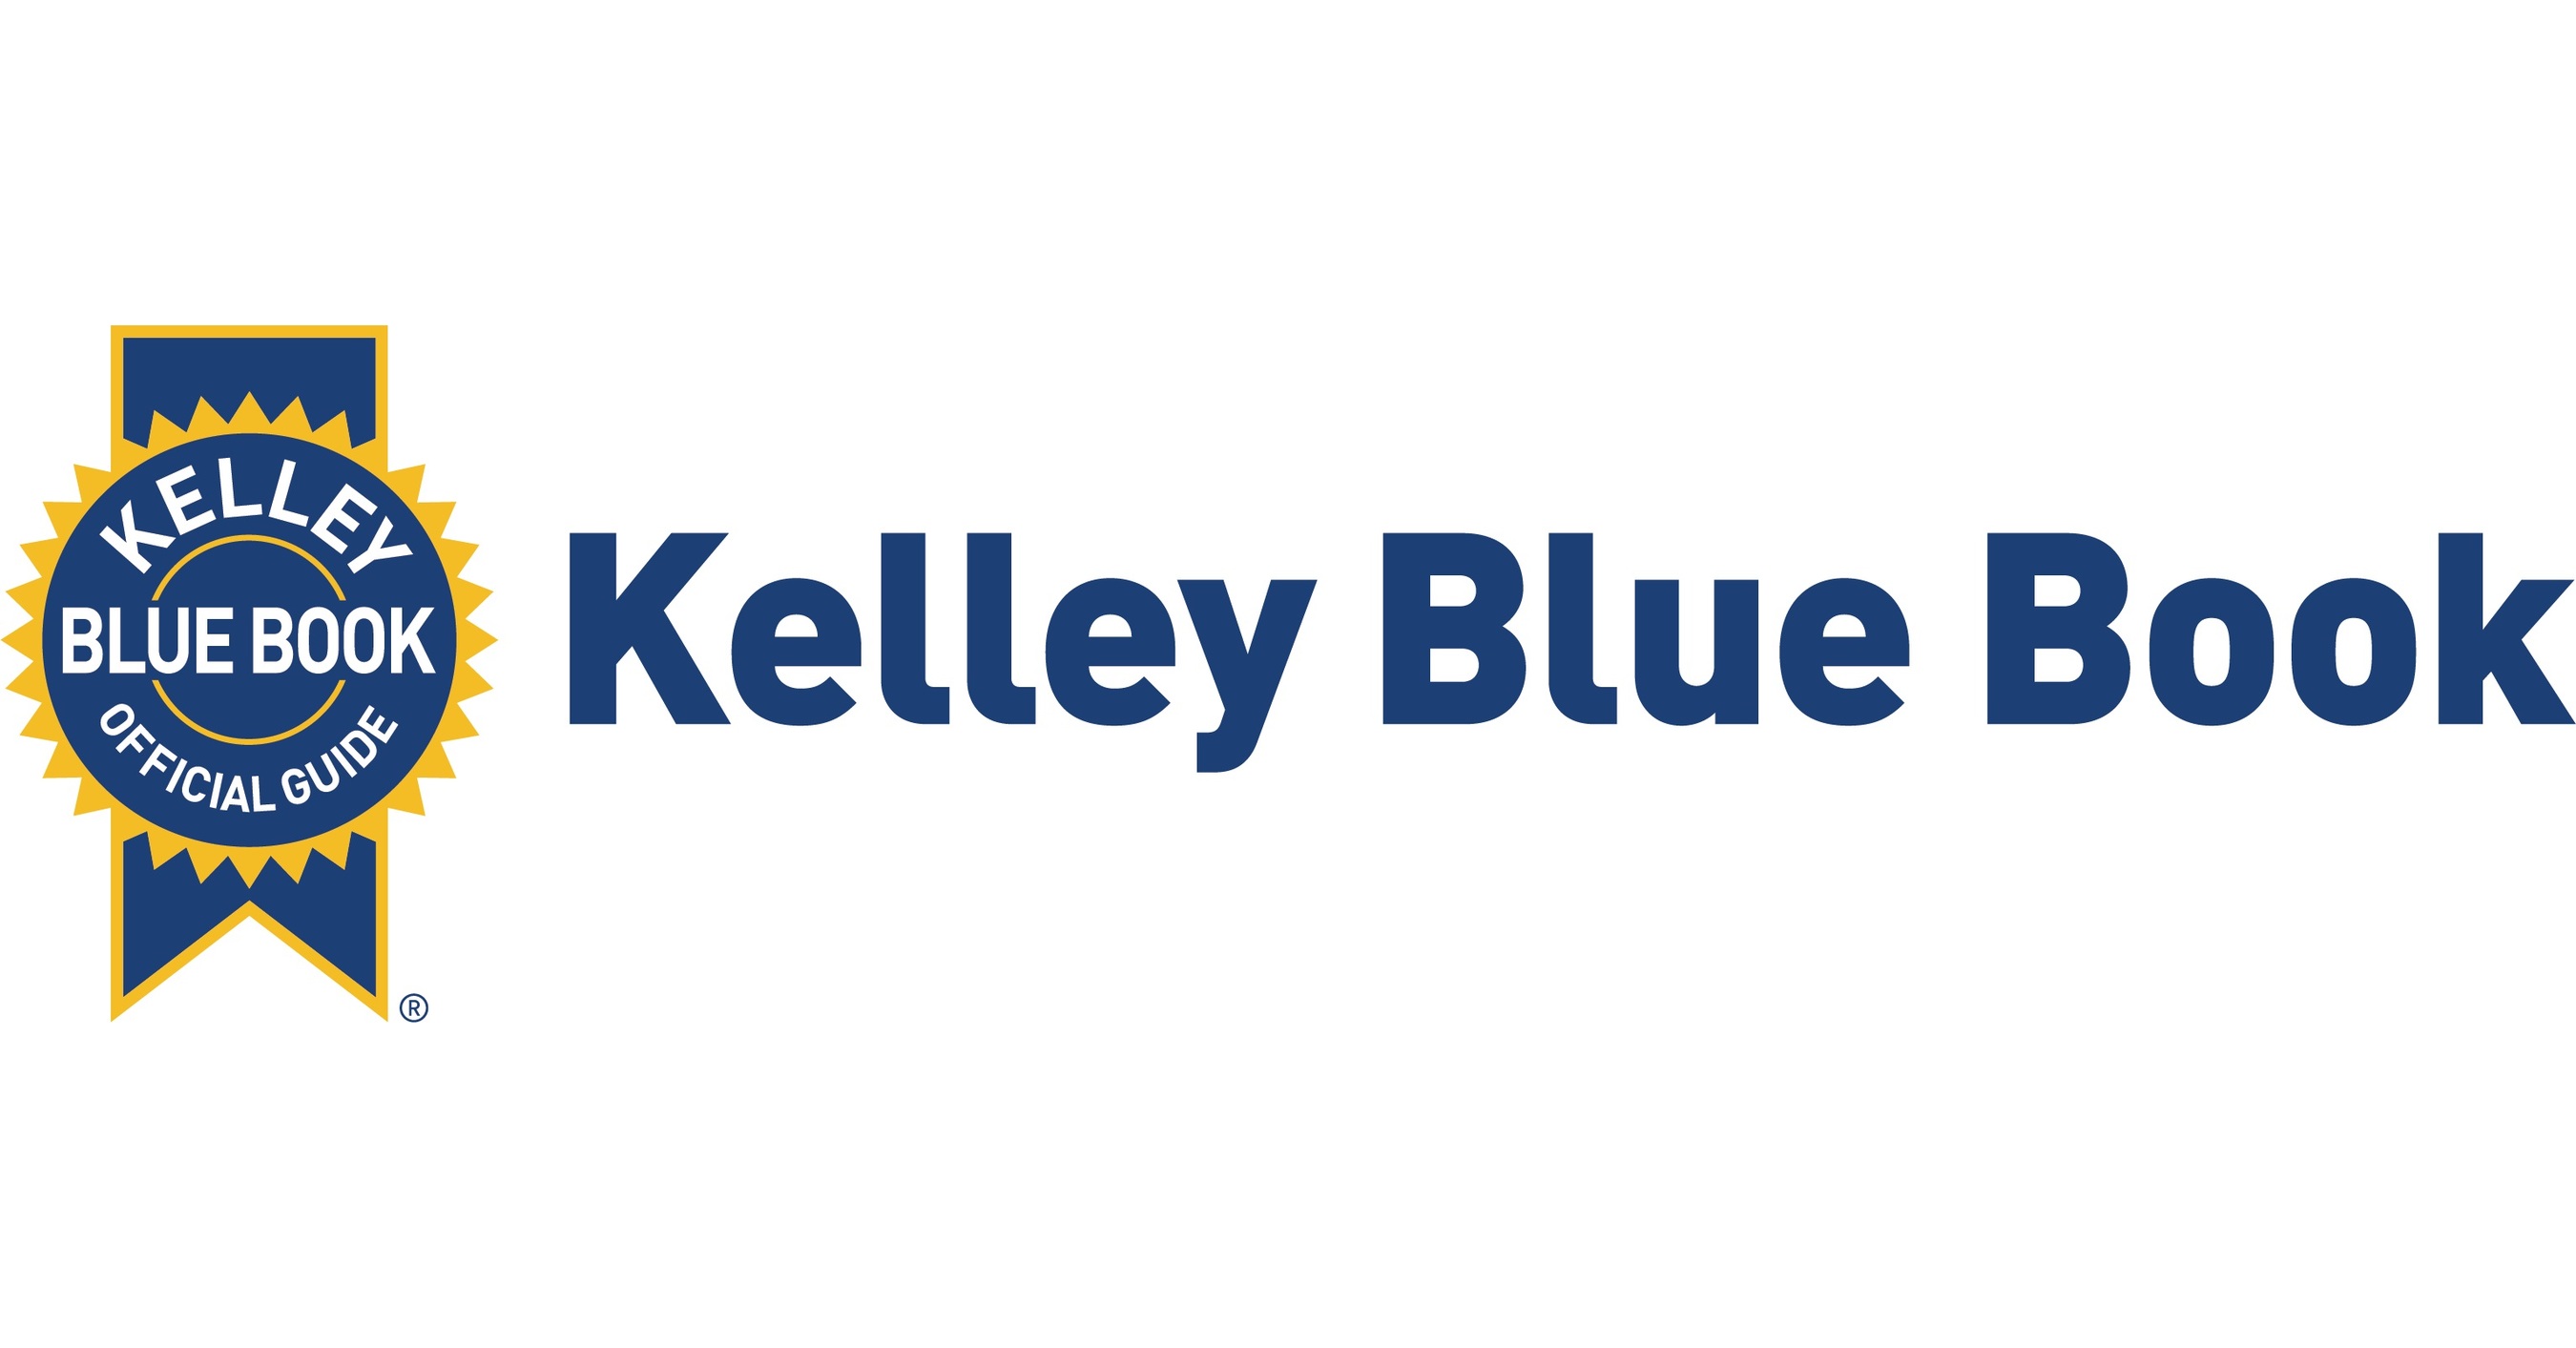 Average New-Vehicle Prices Up Nearly 3% Year-Over-Year in March 2020, Despite COVID-19 Impact on the Economy, According to Kelley Blue Book